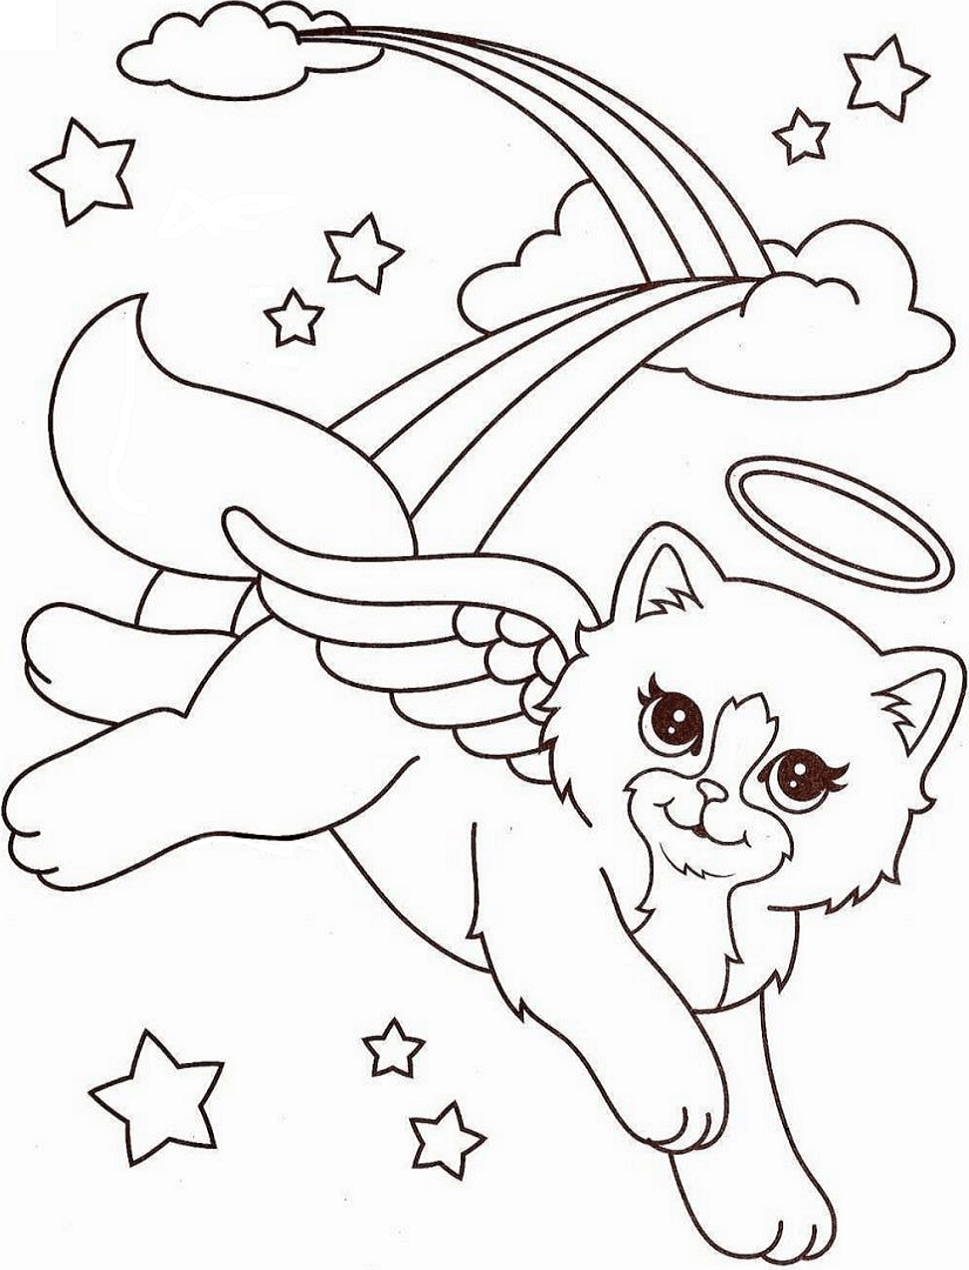 Angel Kitty From Lisa Frank Coloring Page - Free Printable Coloring